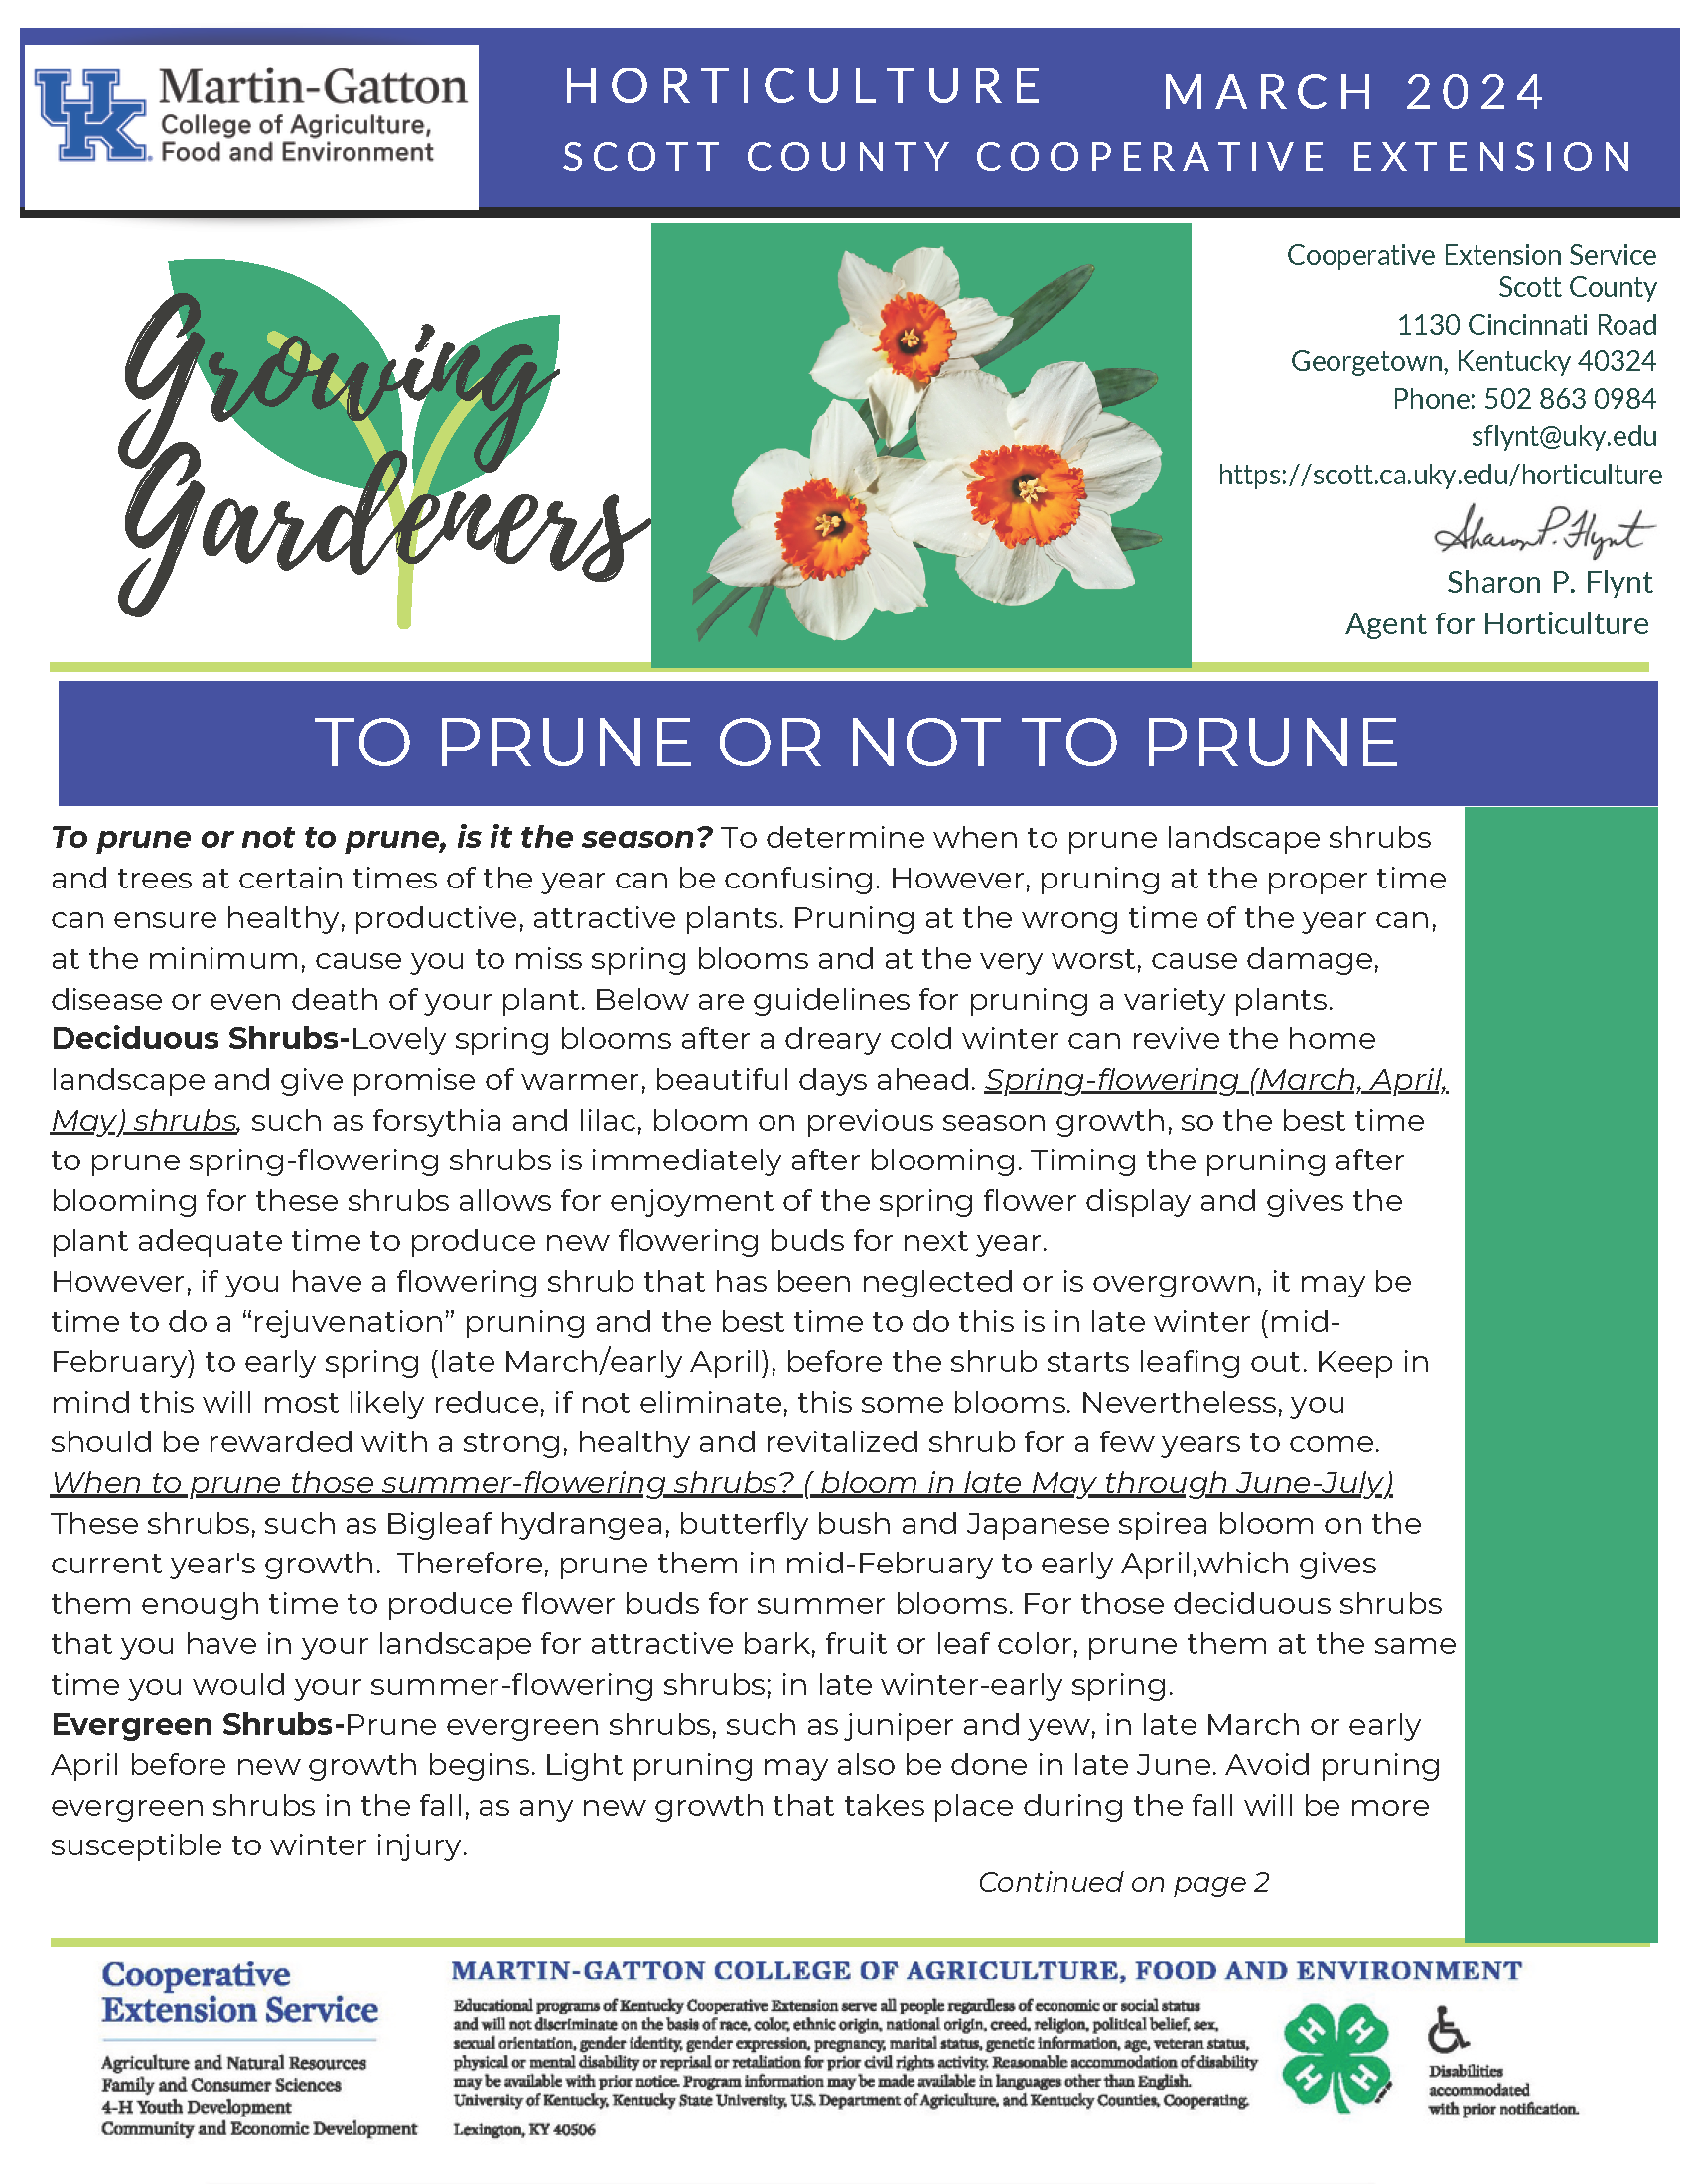 FRONT PAGE OF 2024 HORT MARCH NEWSLETTER